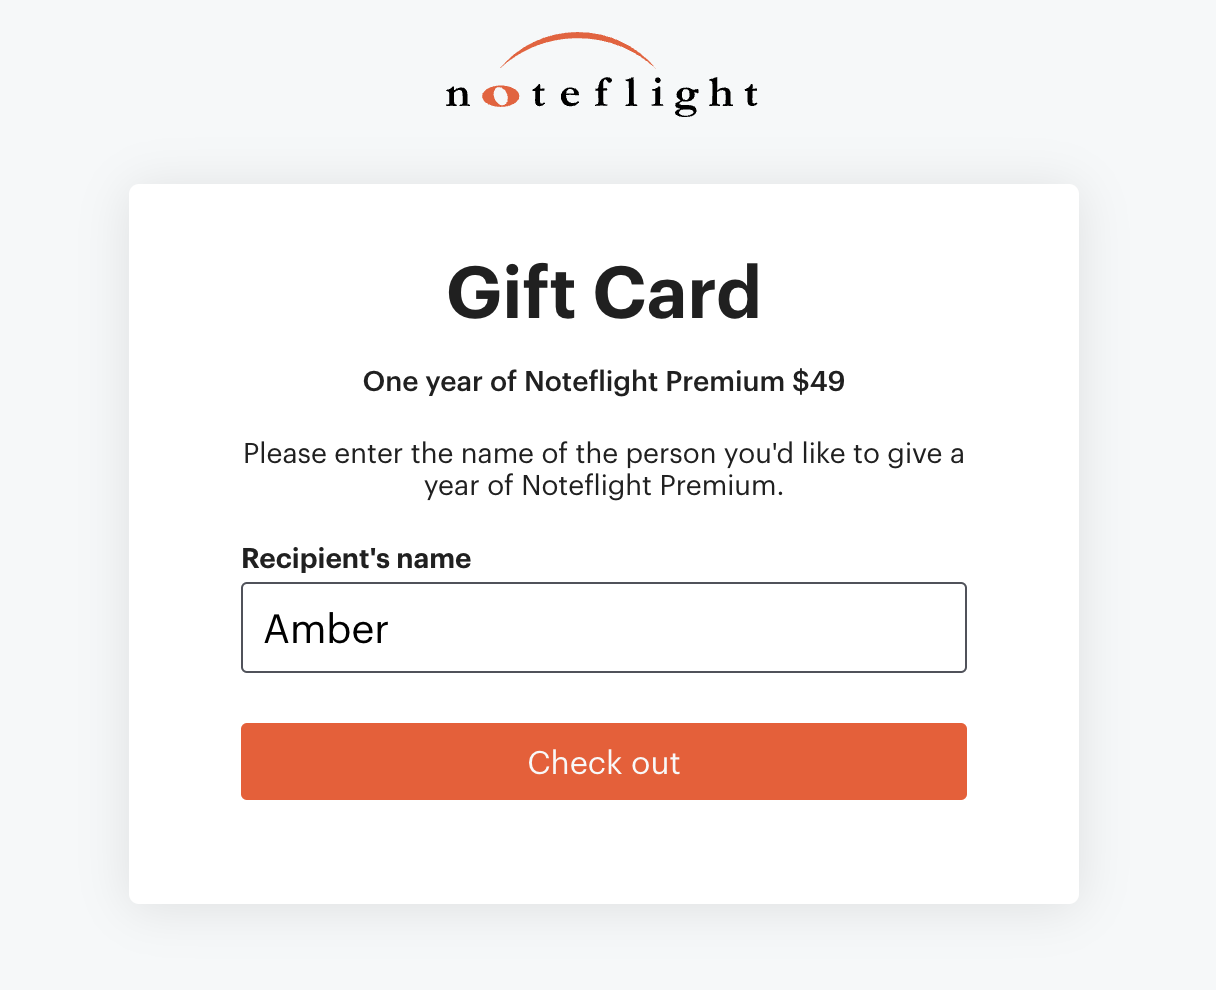 giftCard.png